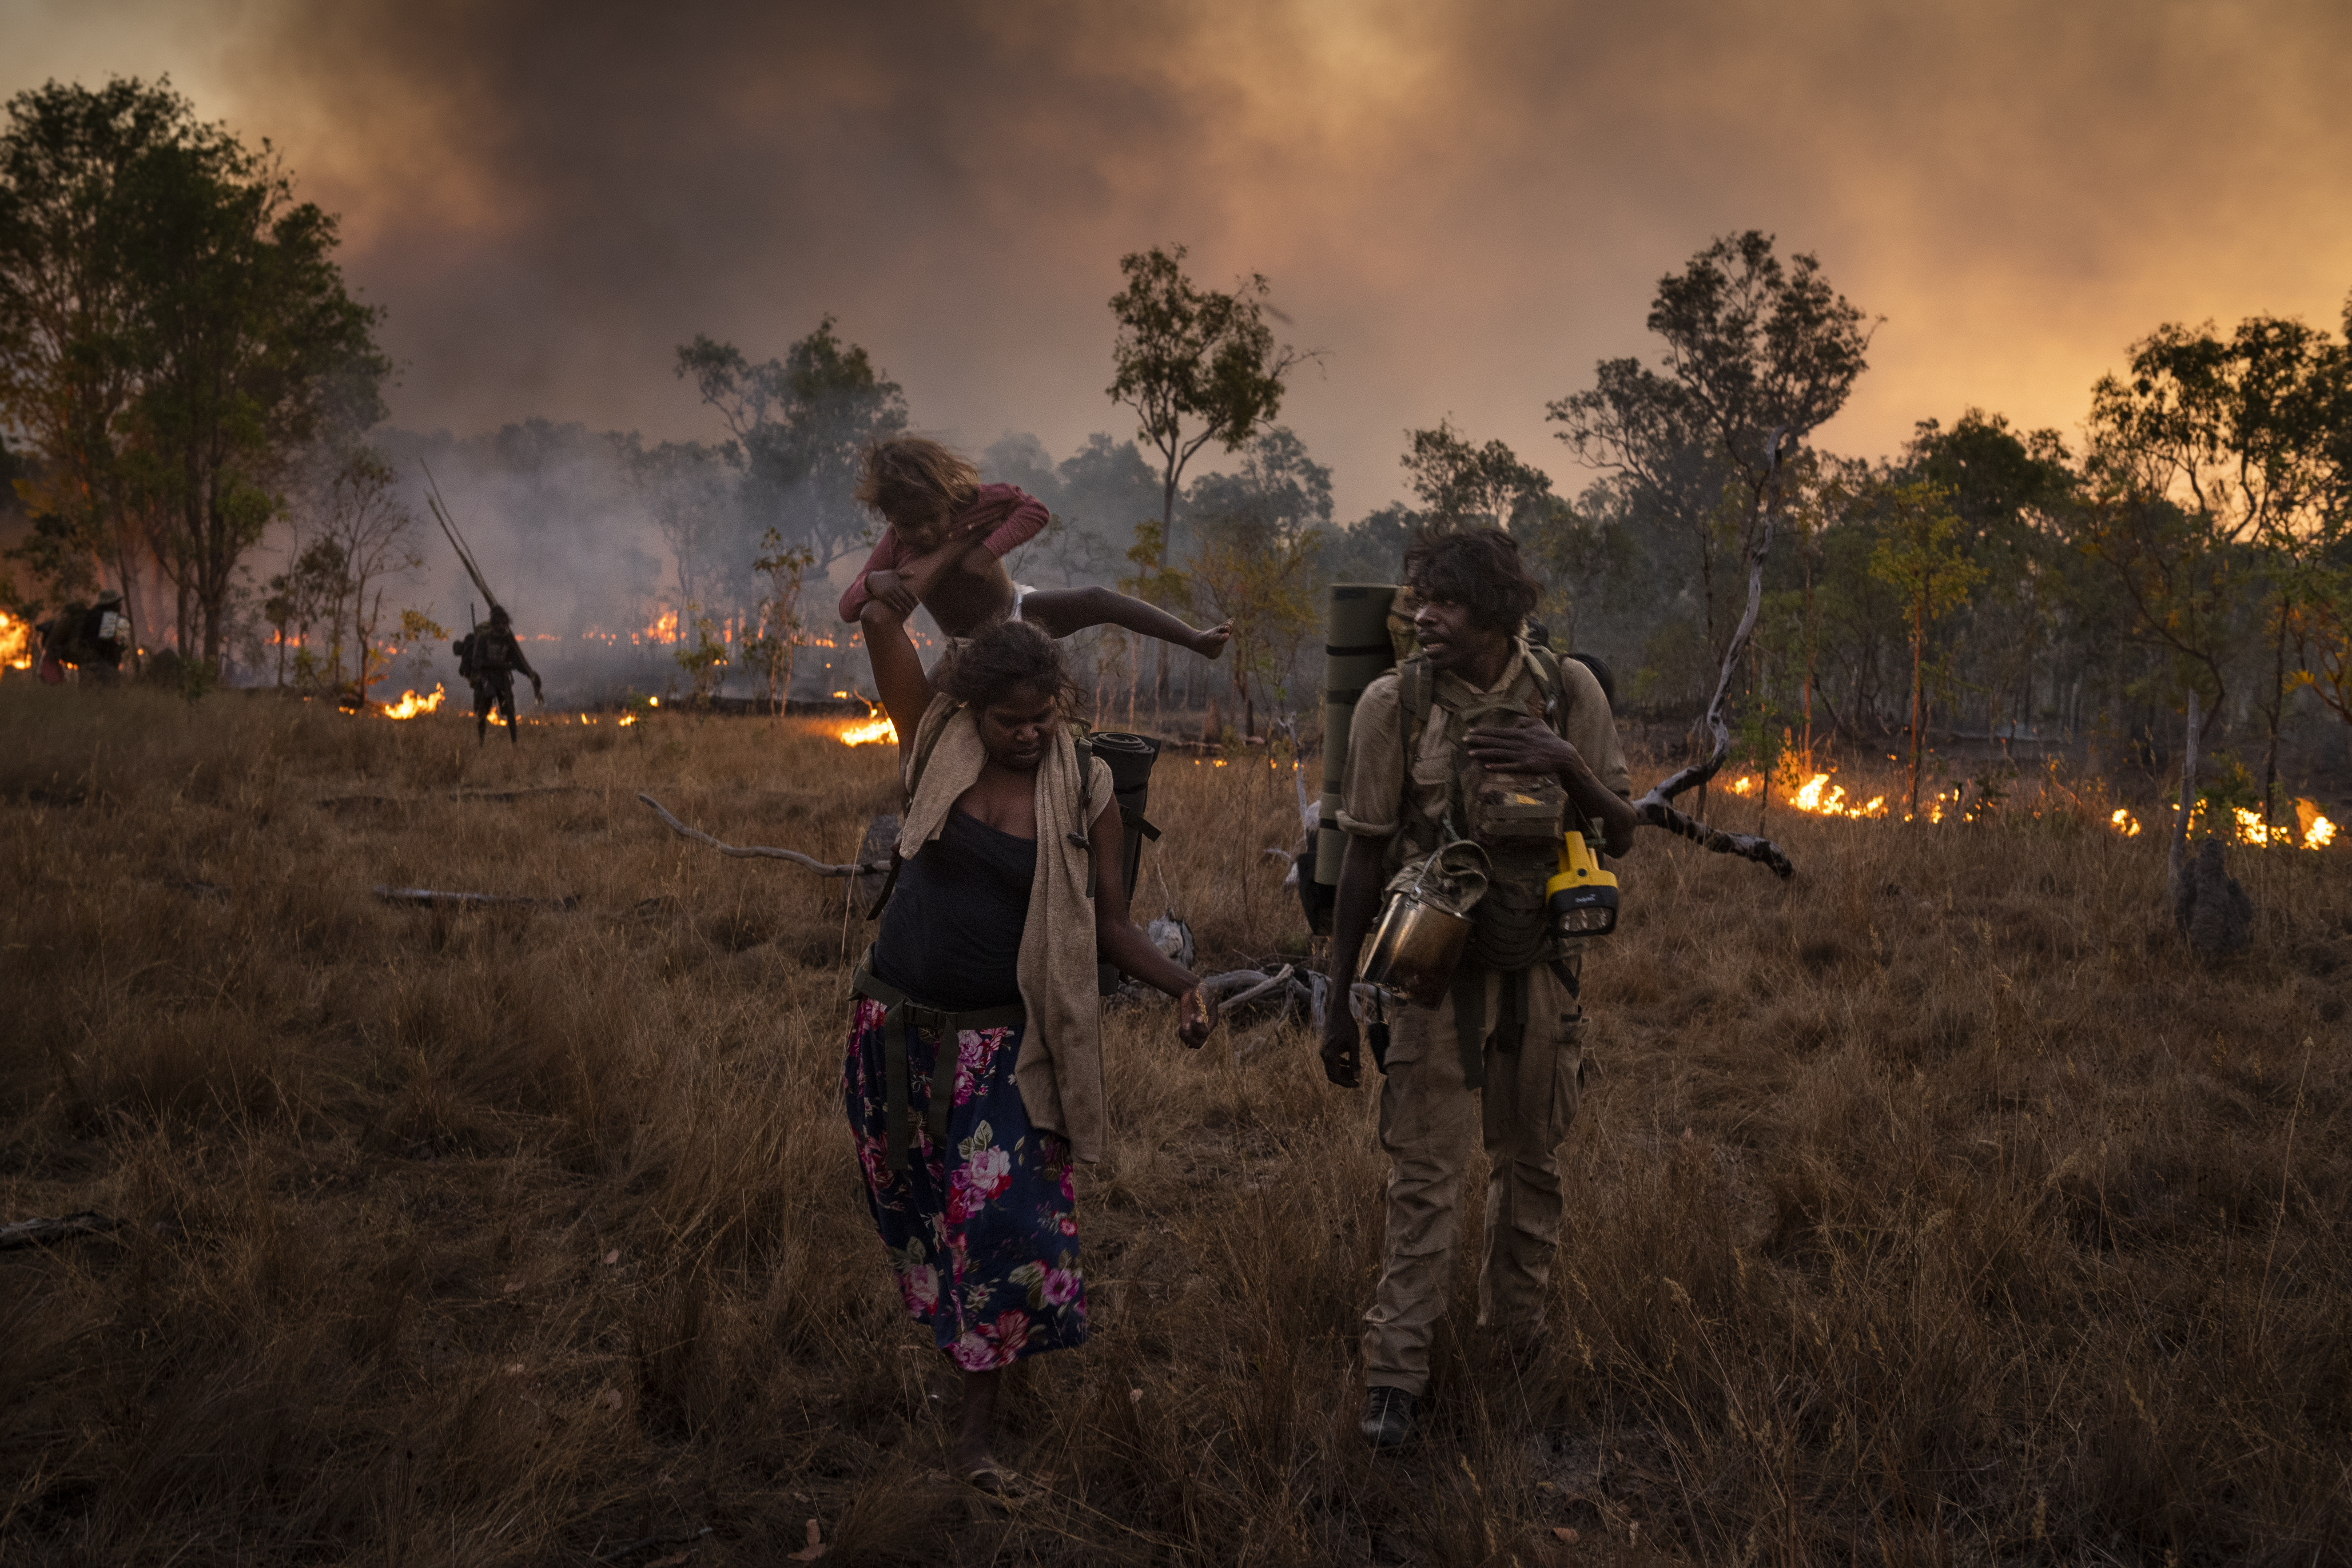 During a five-day bushwalk across several clan estates early in the dry season, a family follows a fire lit by other members of the clan, to help guide them on their journey and to clear the land to prevent destructive fires.